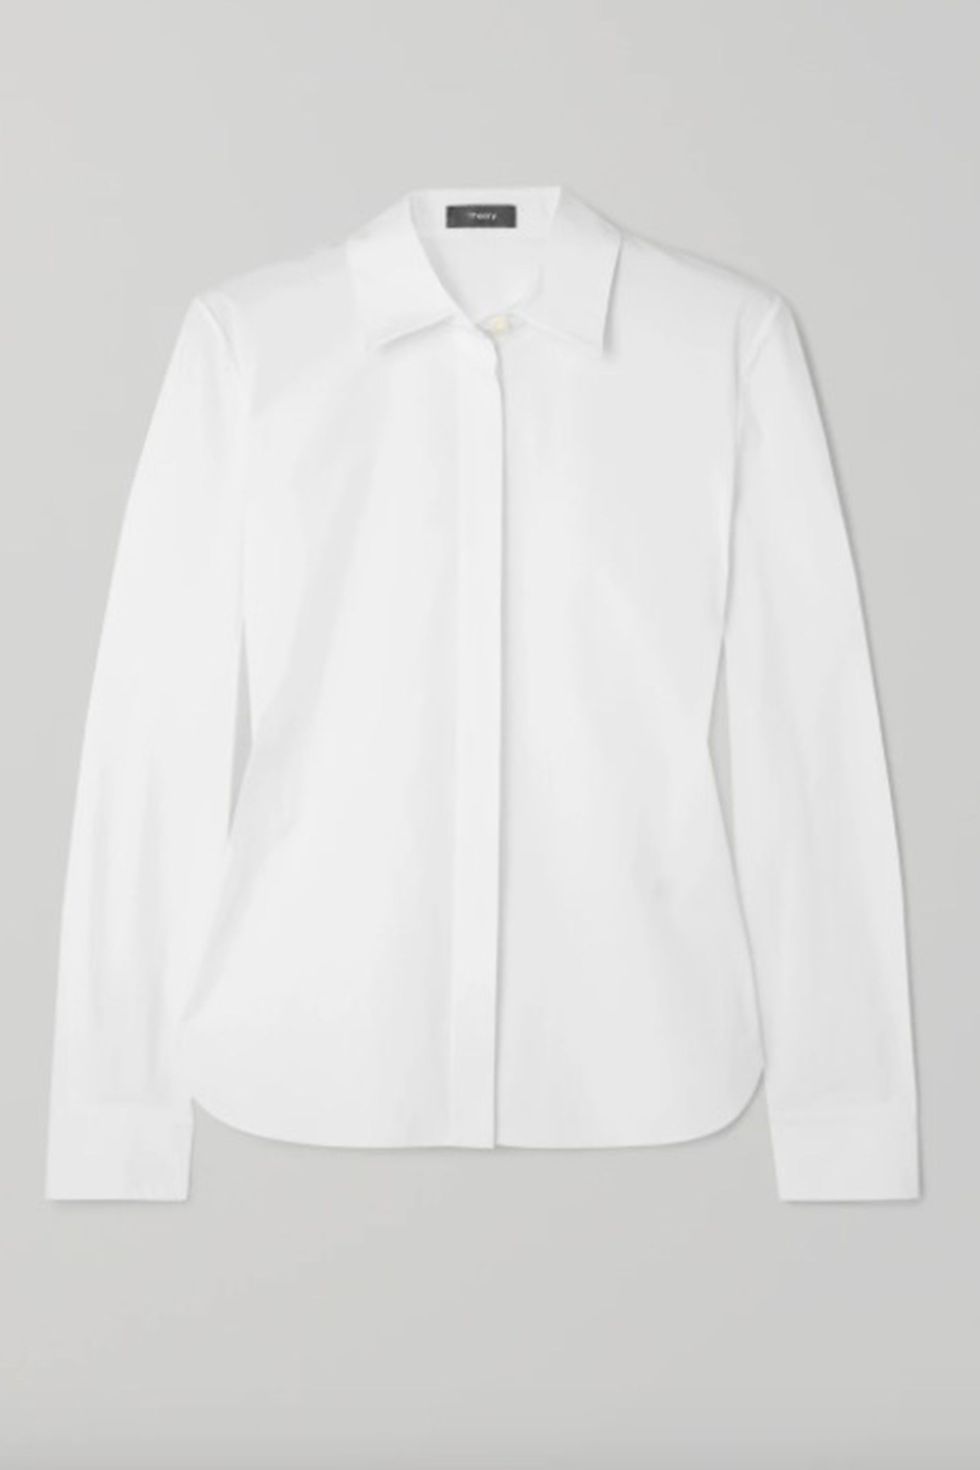 theory white shirt, duchess of sussex style 